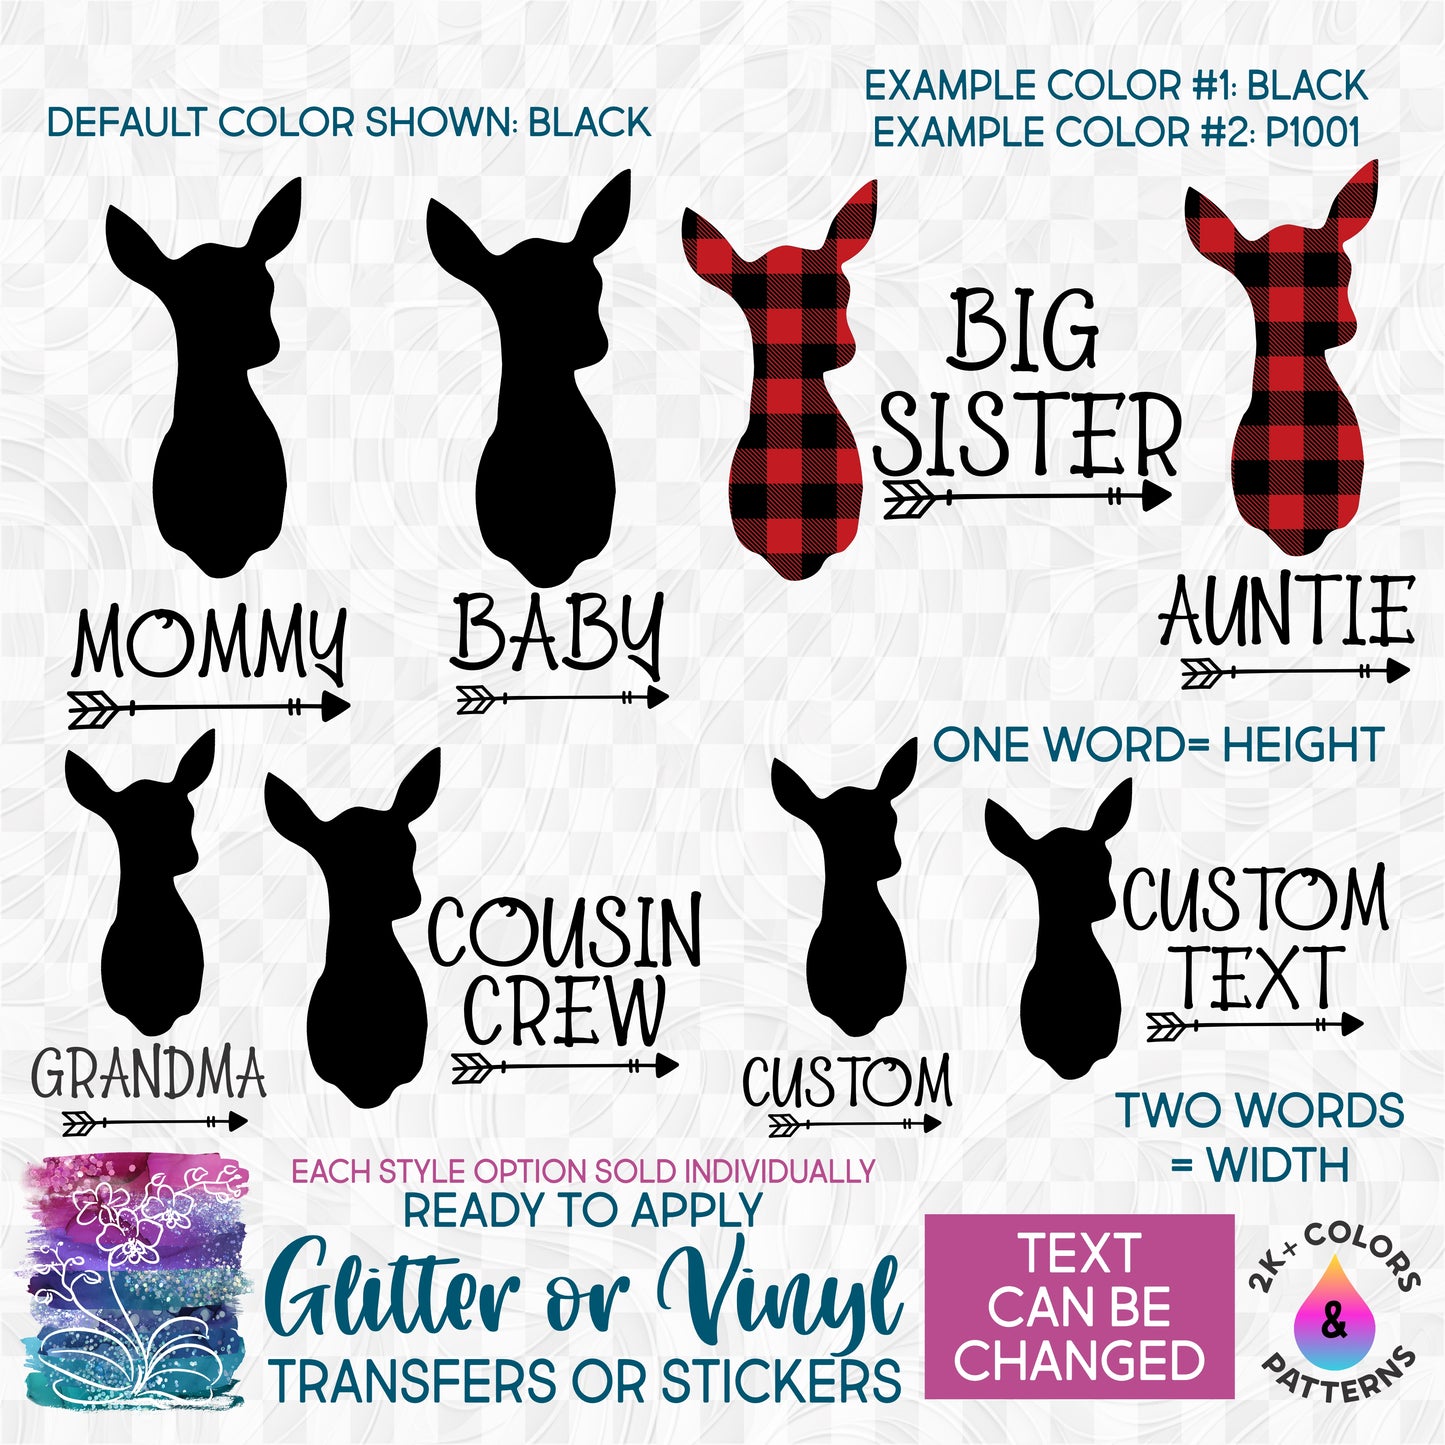 s63-5B Doe Deer Family Mama Sister Dad Brother Cousin Big Little Custom Printed Iron On Transfer or Sticker